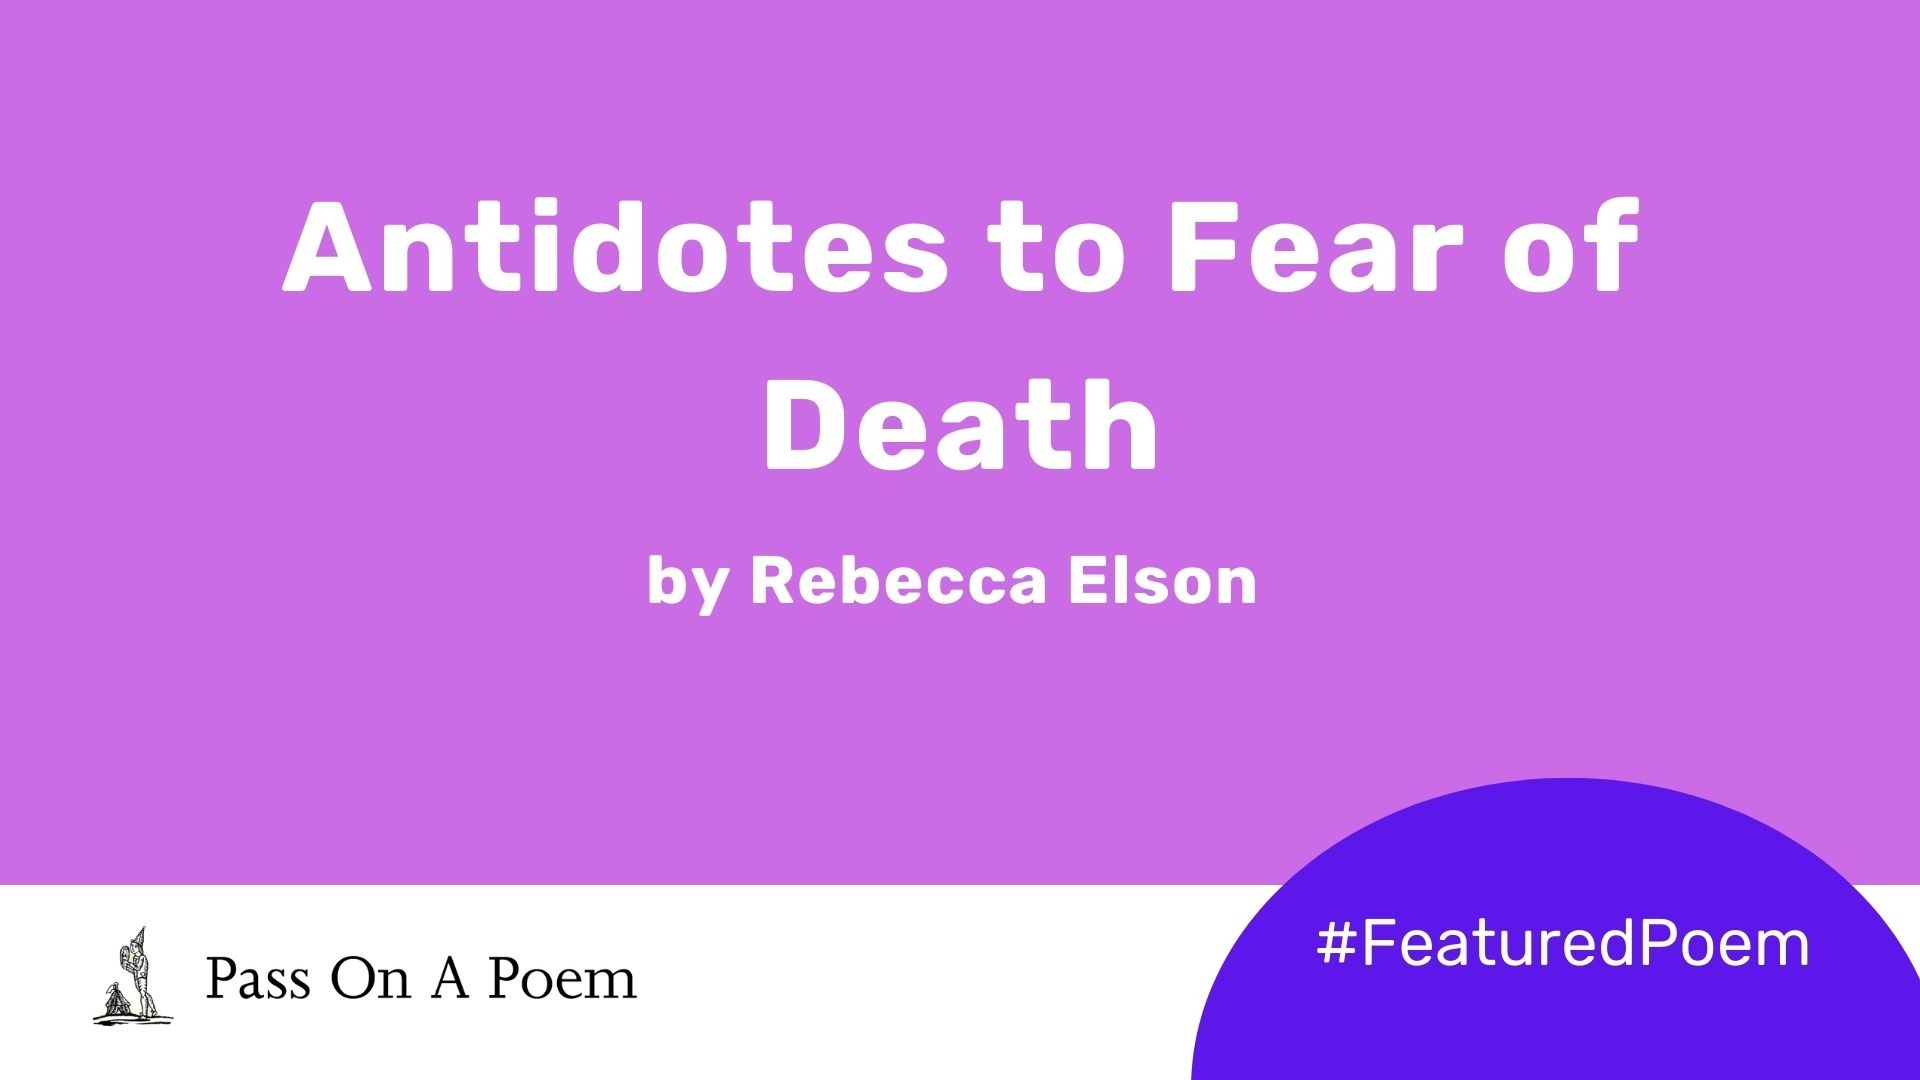 essay about fear of death